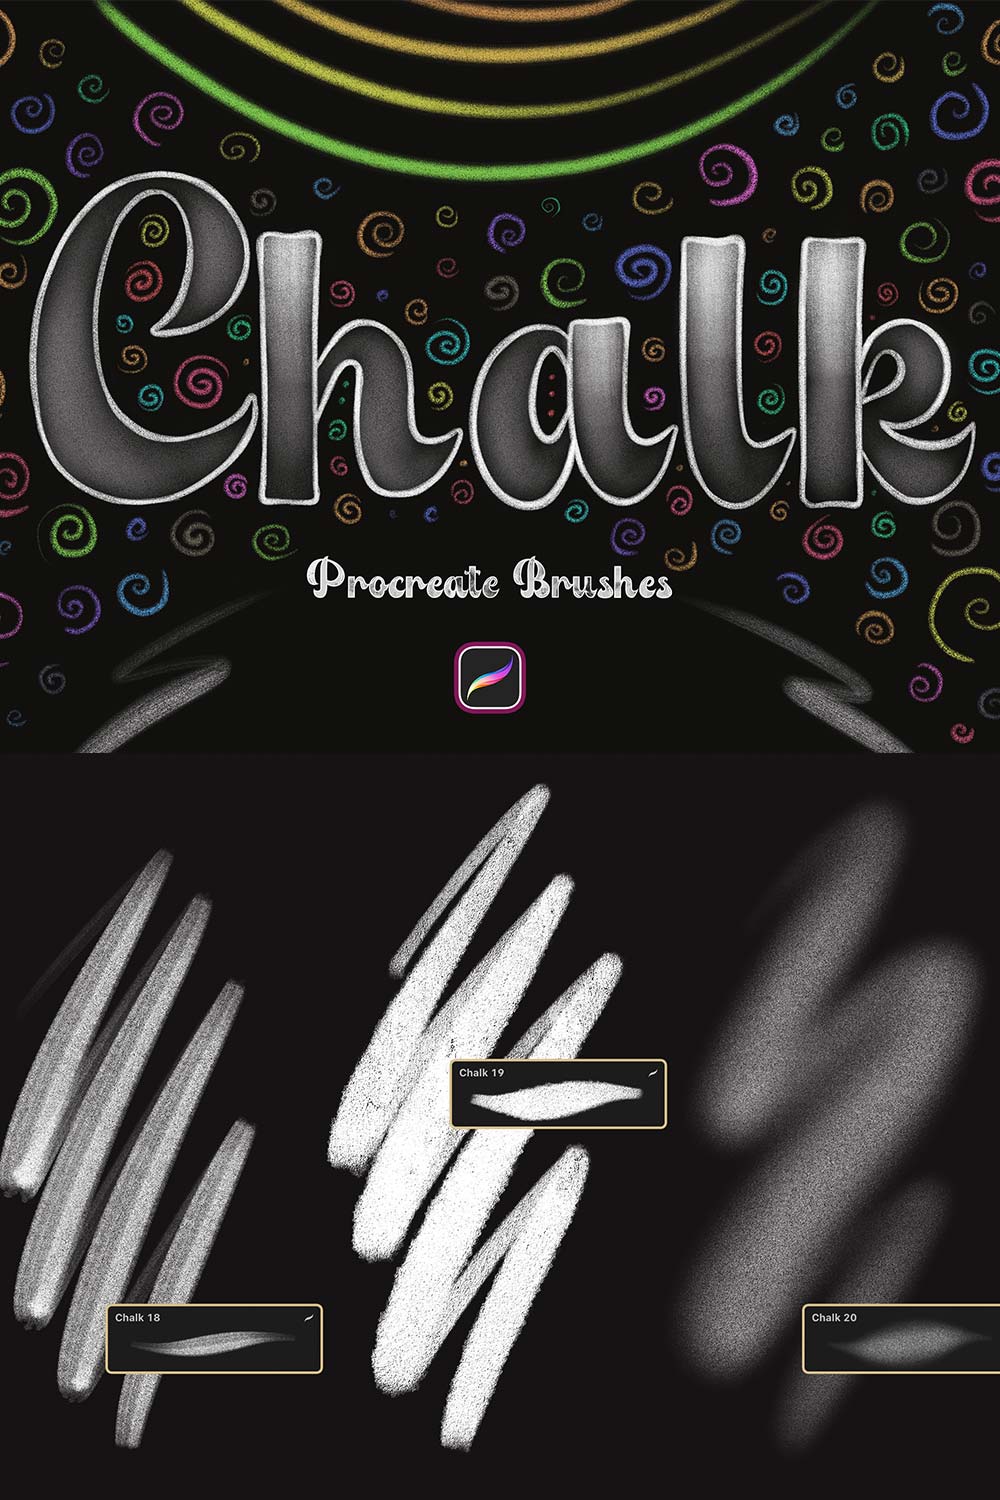 Chalk Procreate Brushes pinterest preview image.